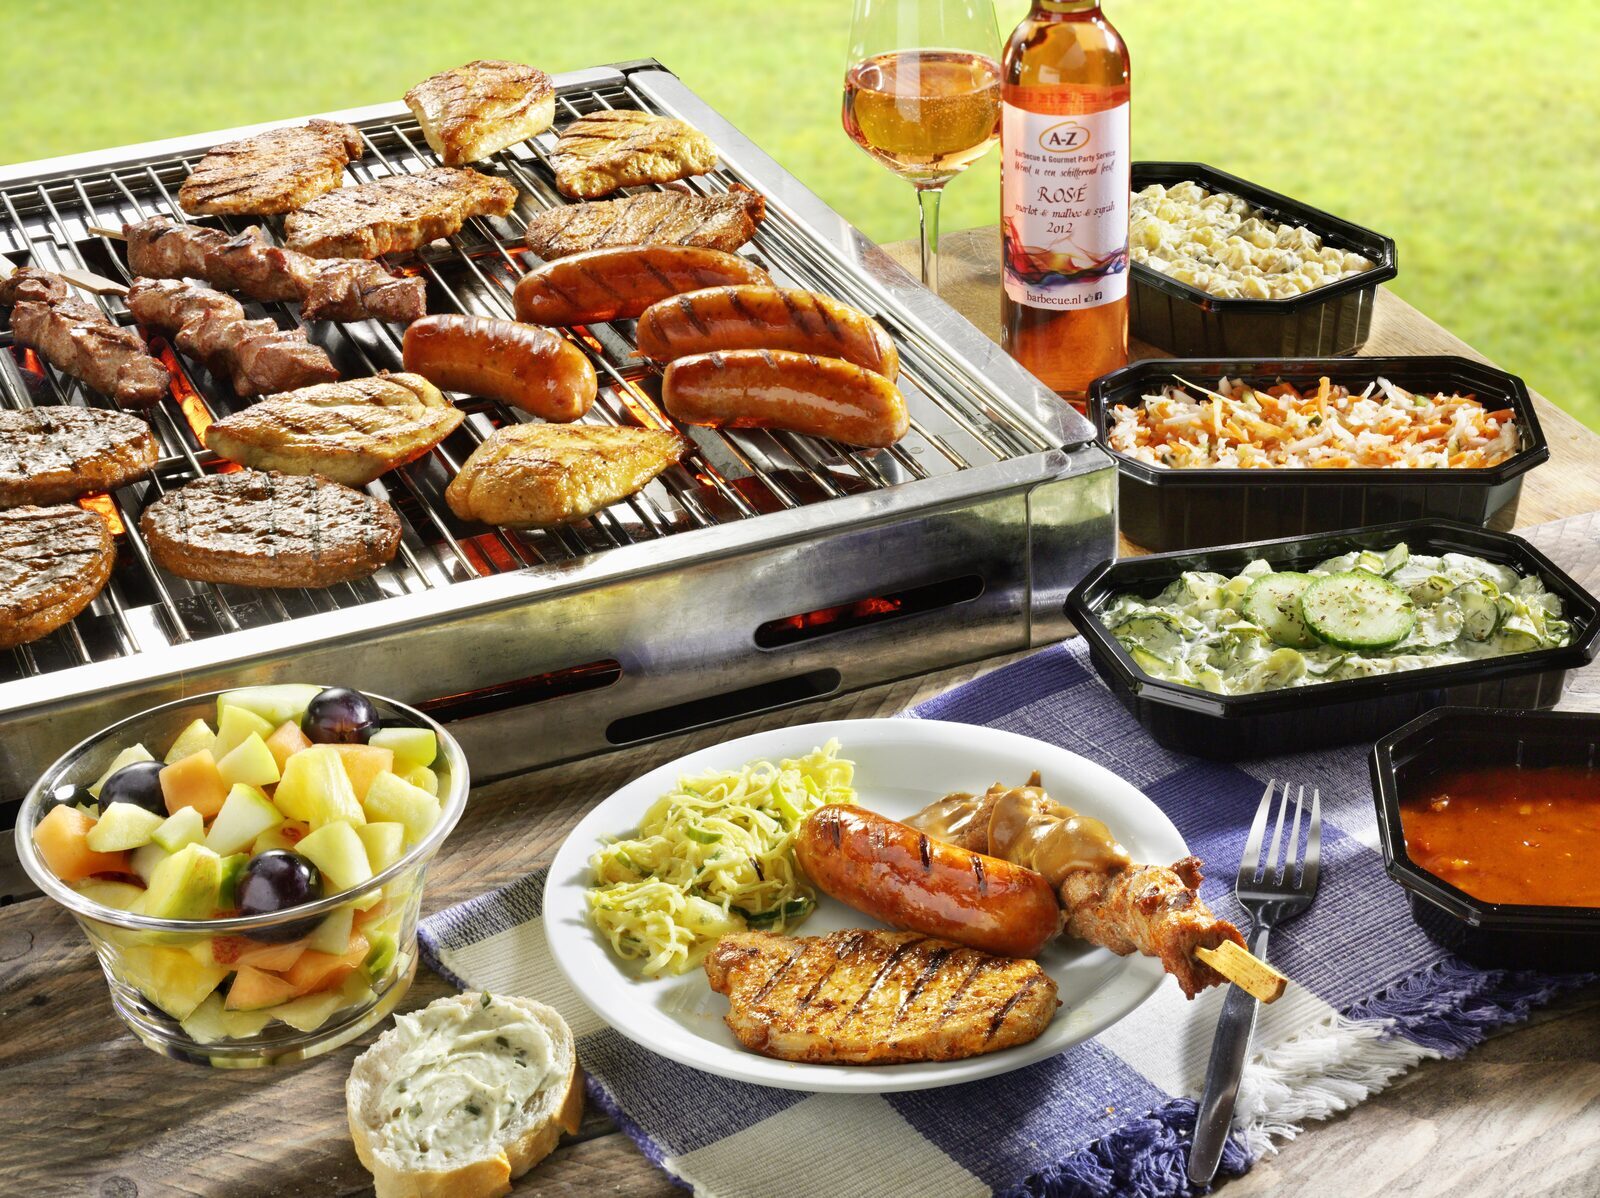 Barbecue packages